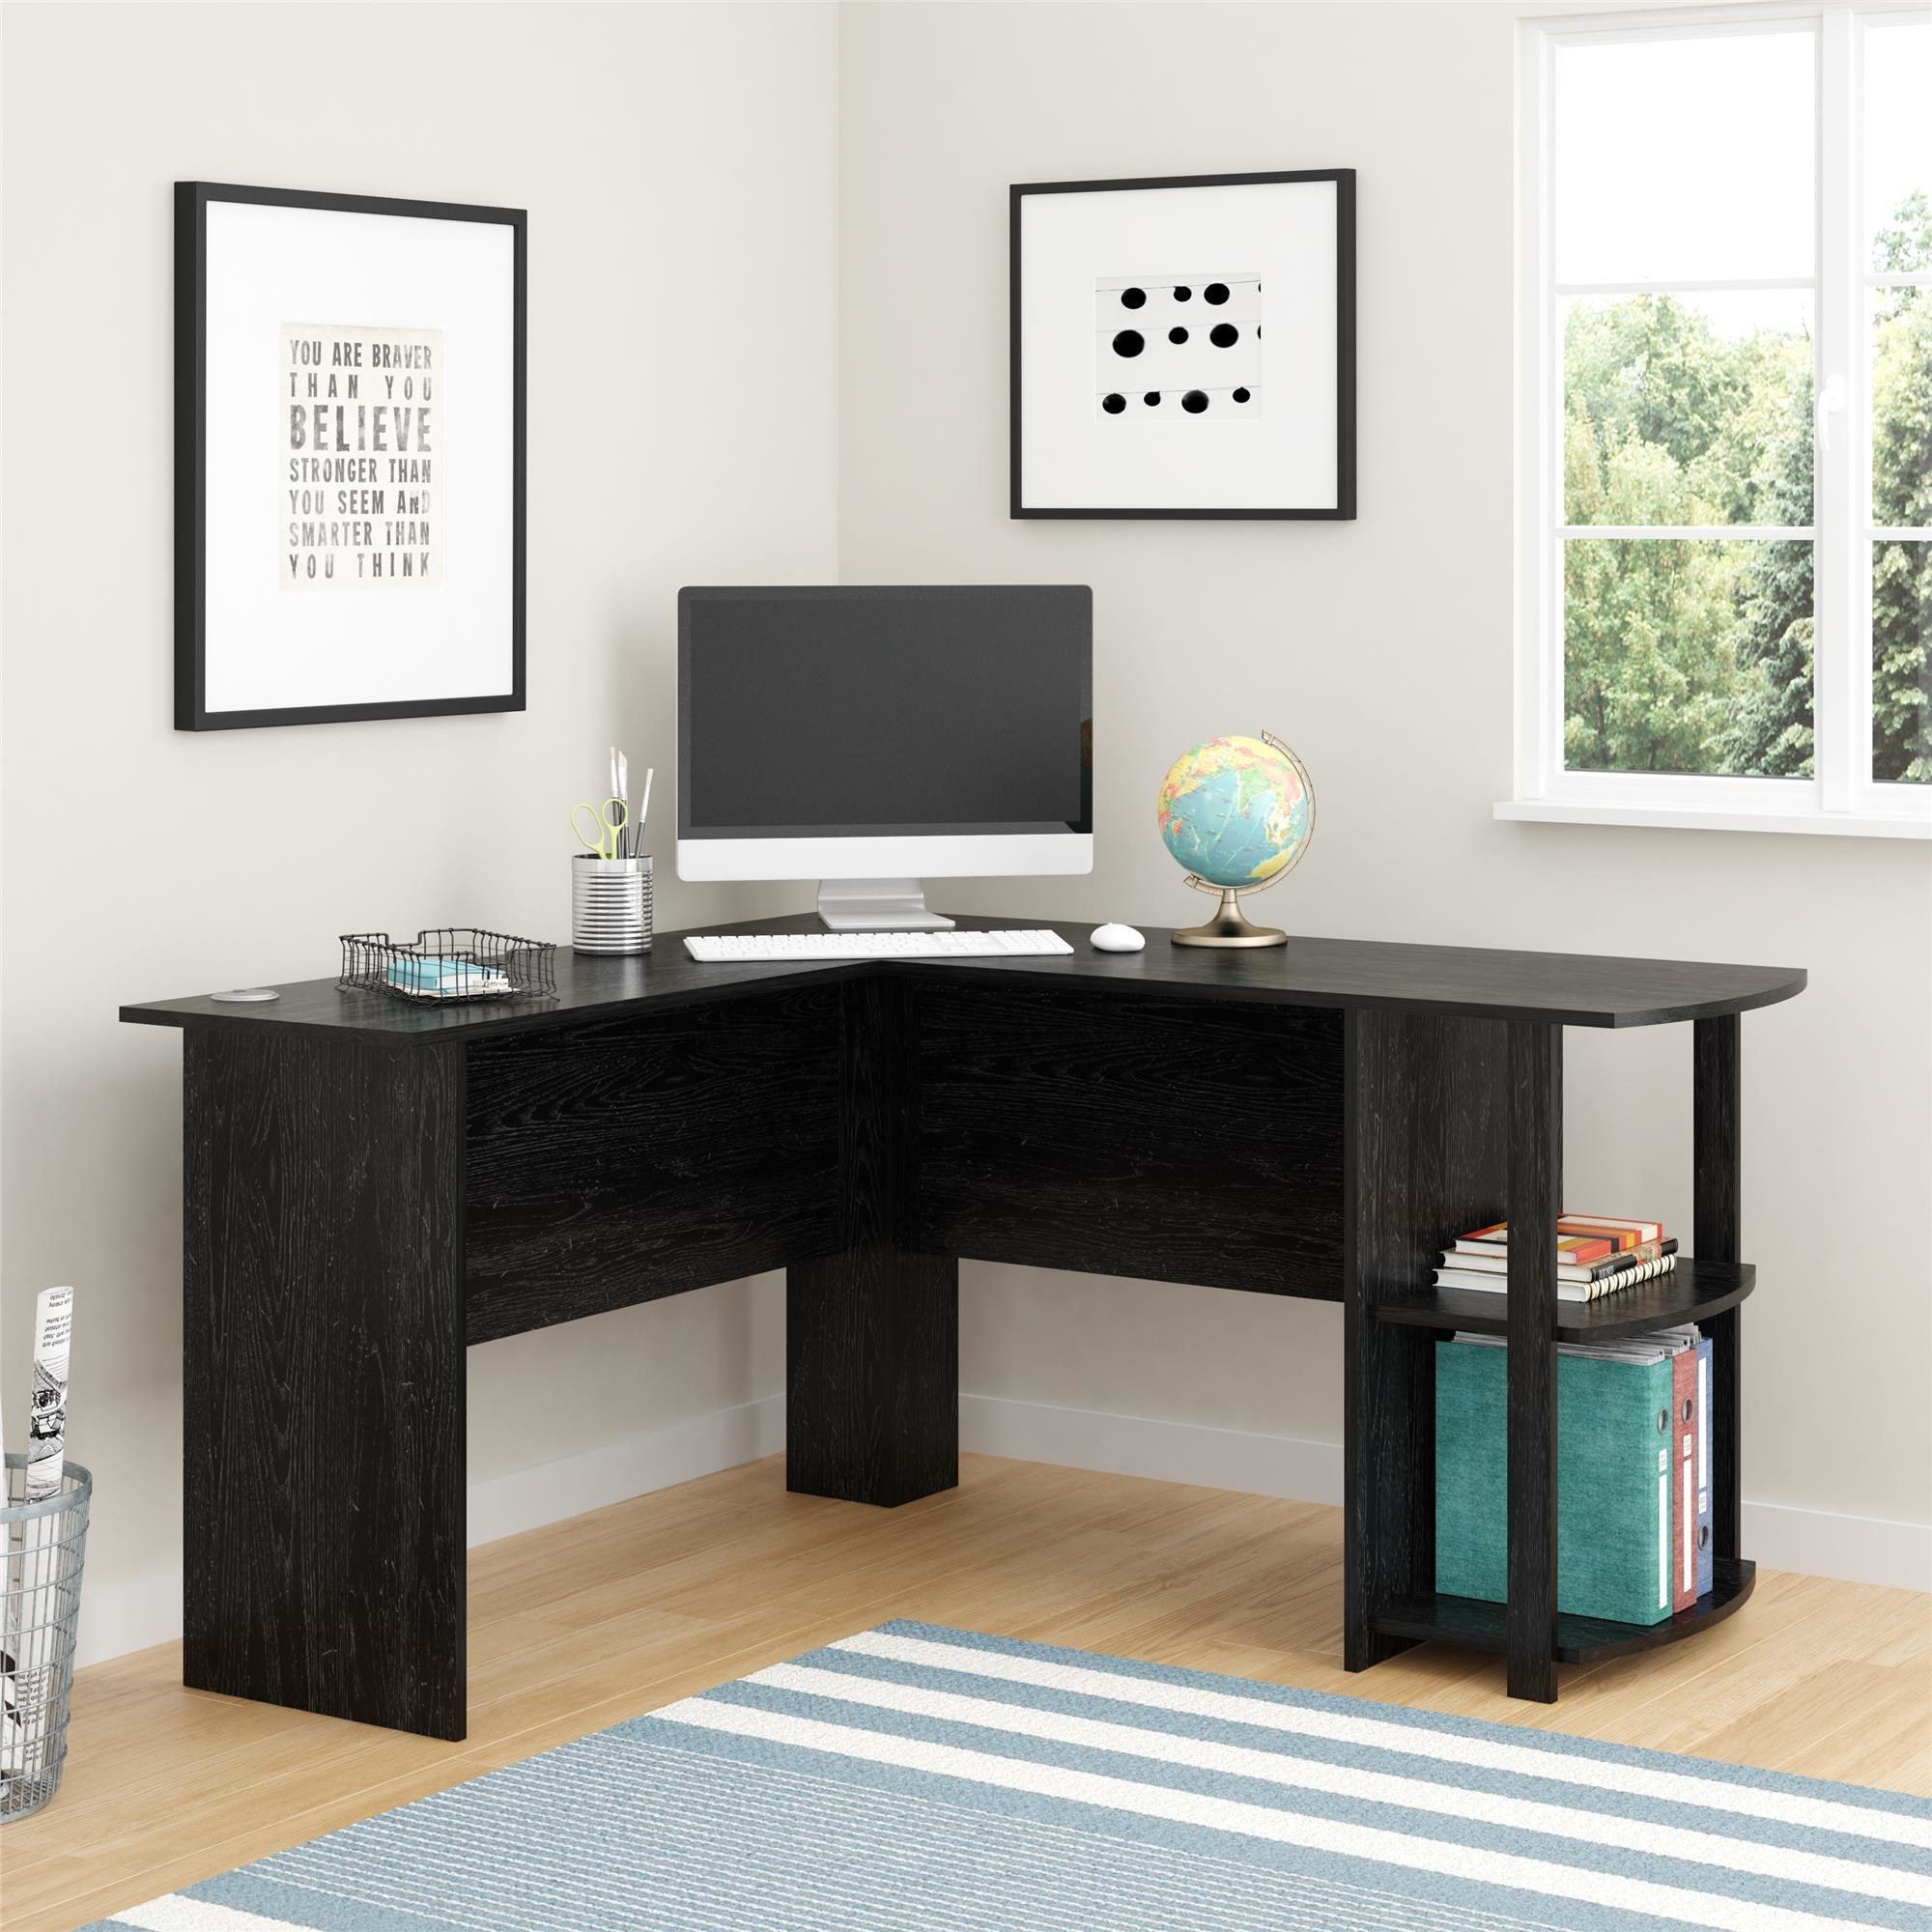 An image of a black oak L-shaped desk with built-in shelves and two grommets to organize and manage cords from devices